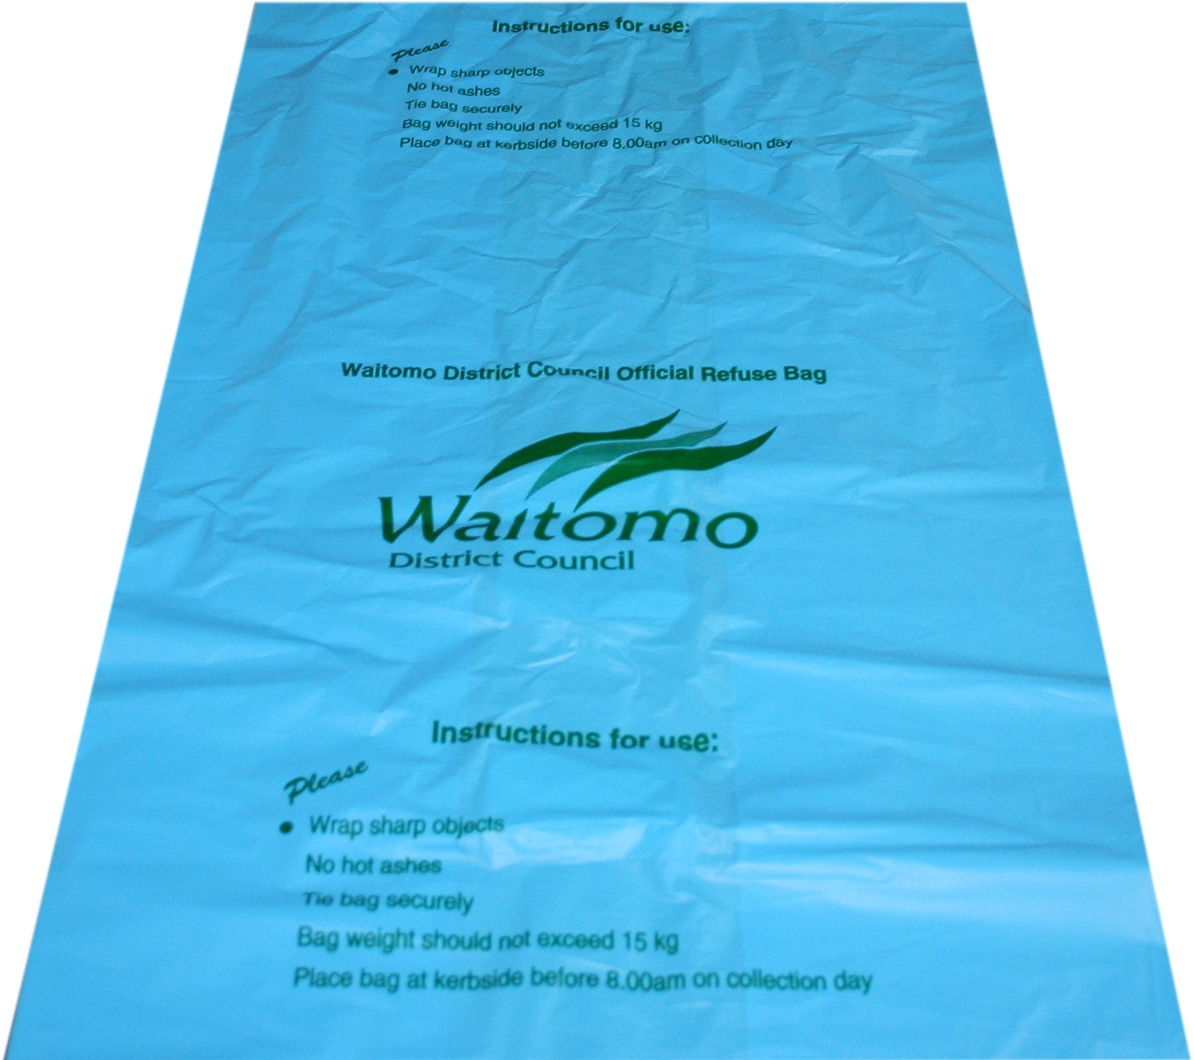 WDC's official rubbish bag is blue